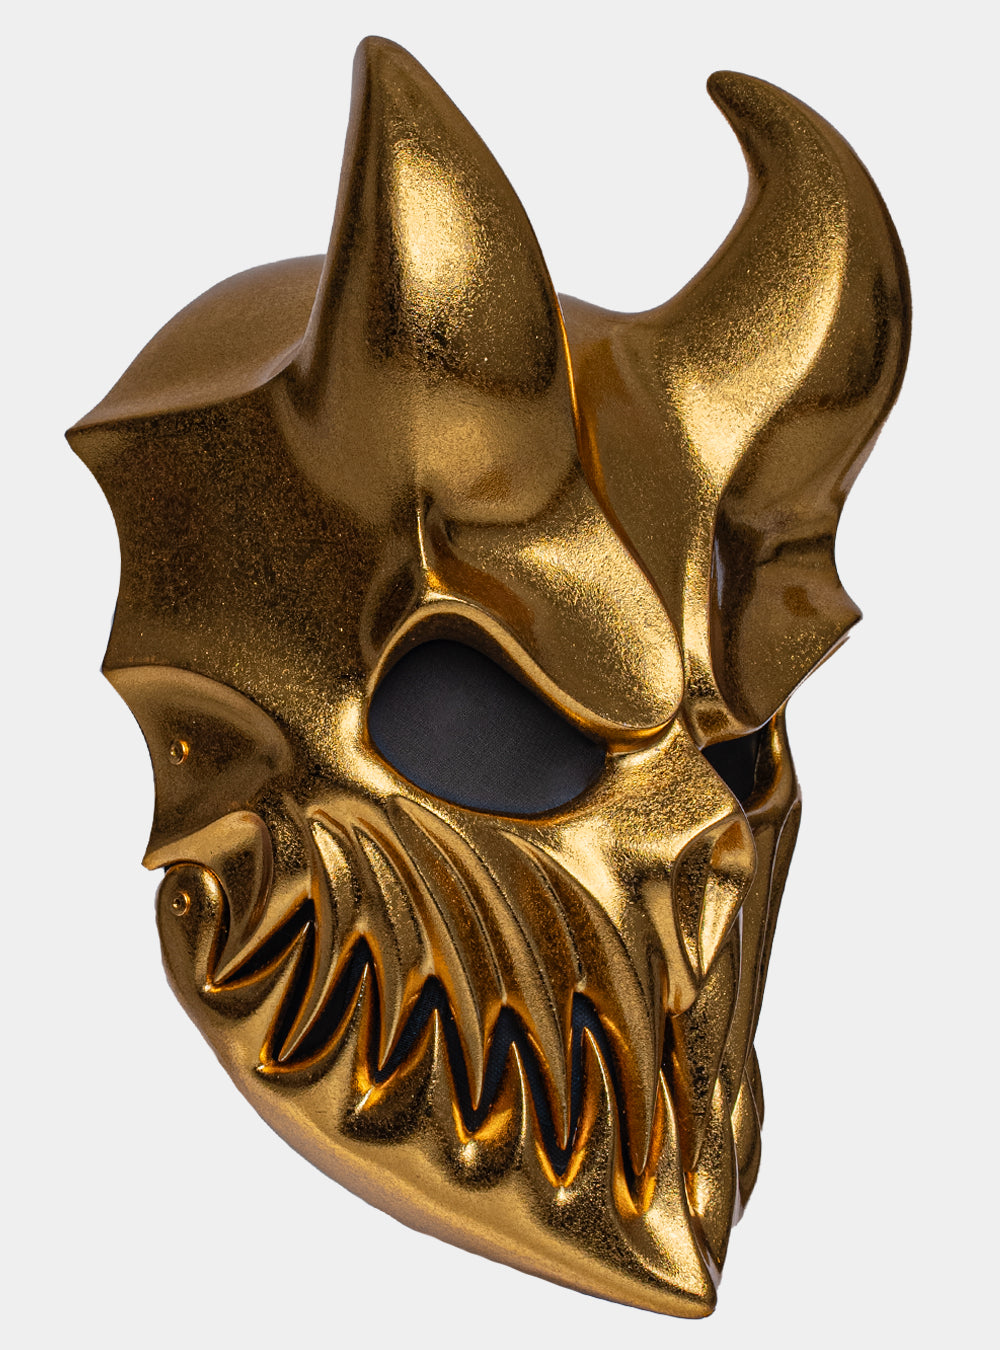 (SLAUGHTER TO PREVAIL) ALEX TERRIBLE MASK “KID OF DARKNESS” (GOLD)